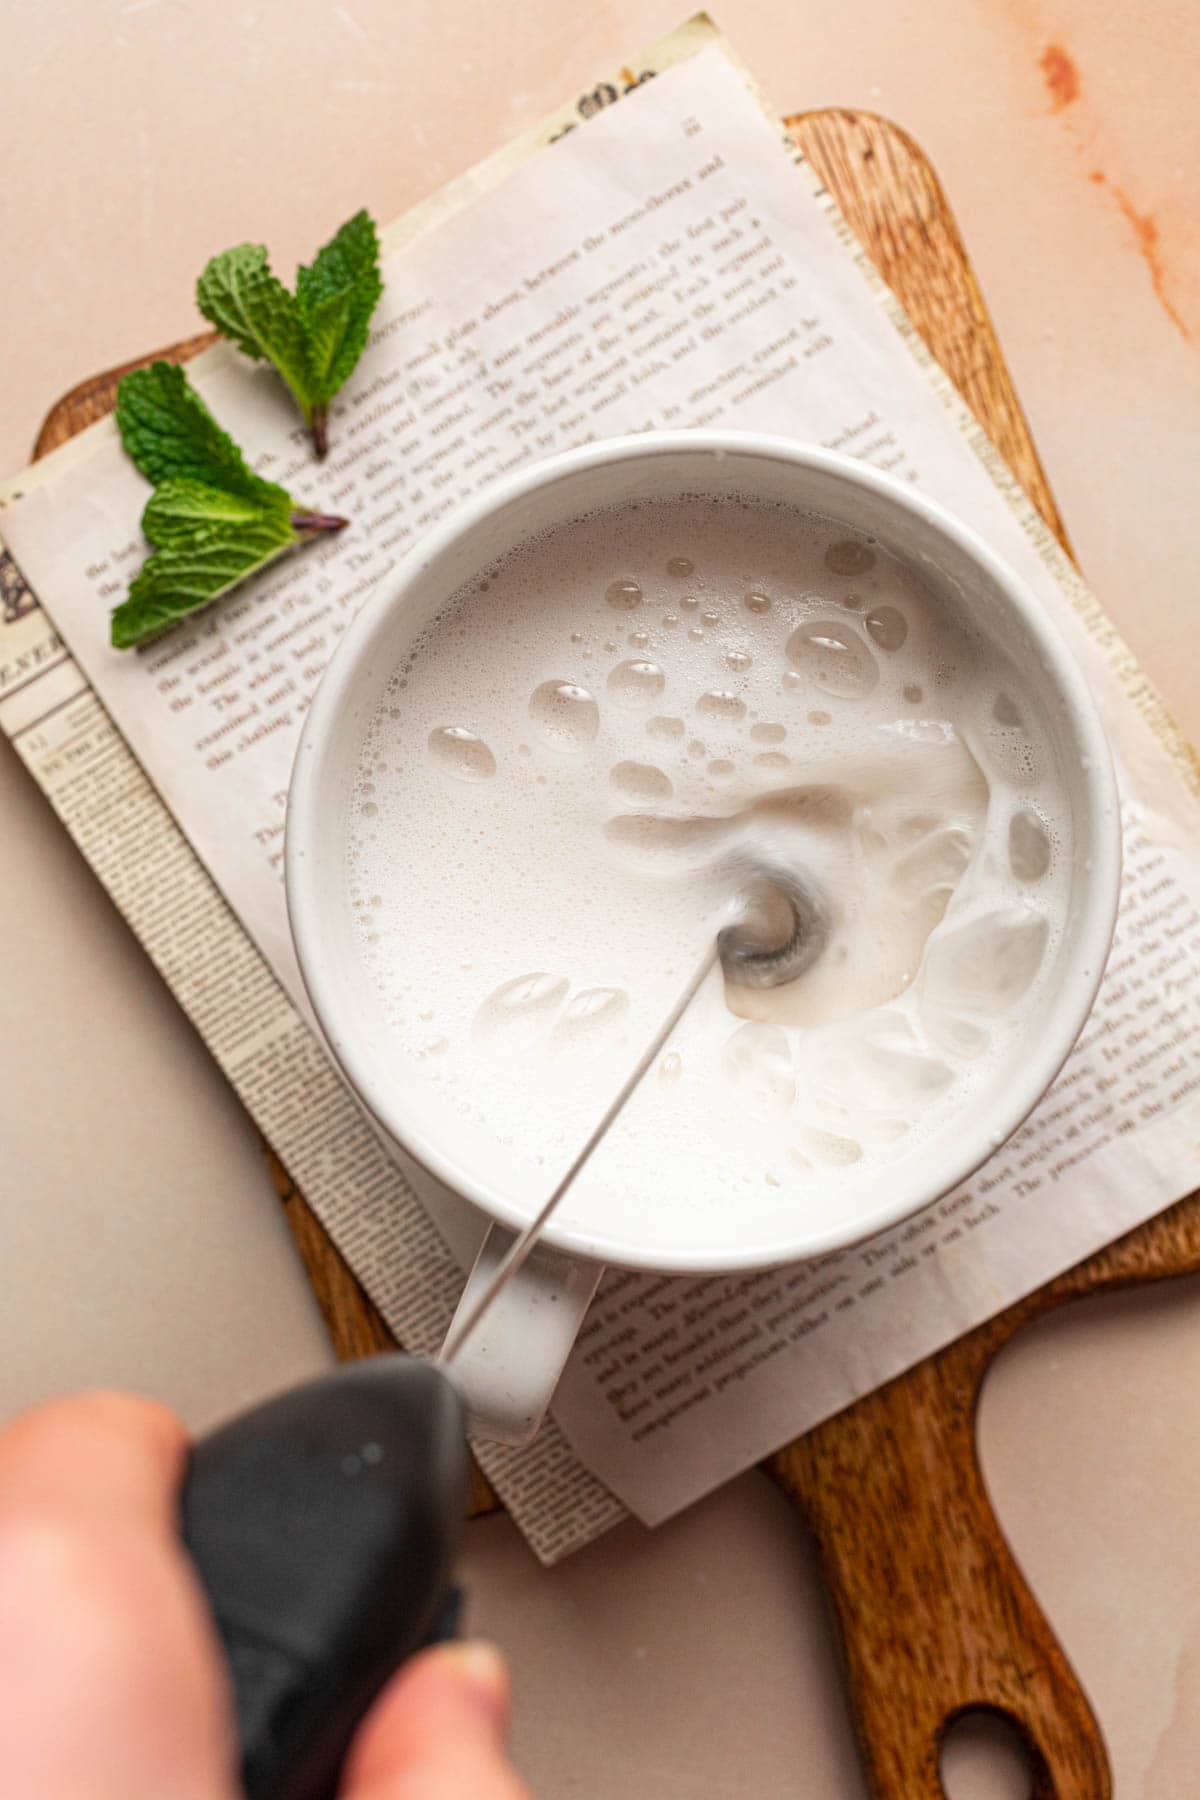 Oat milk being frothed using a handheld milk frother.